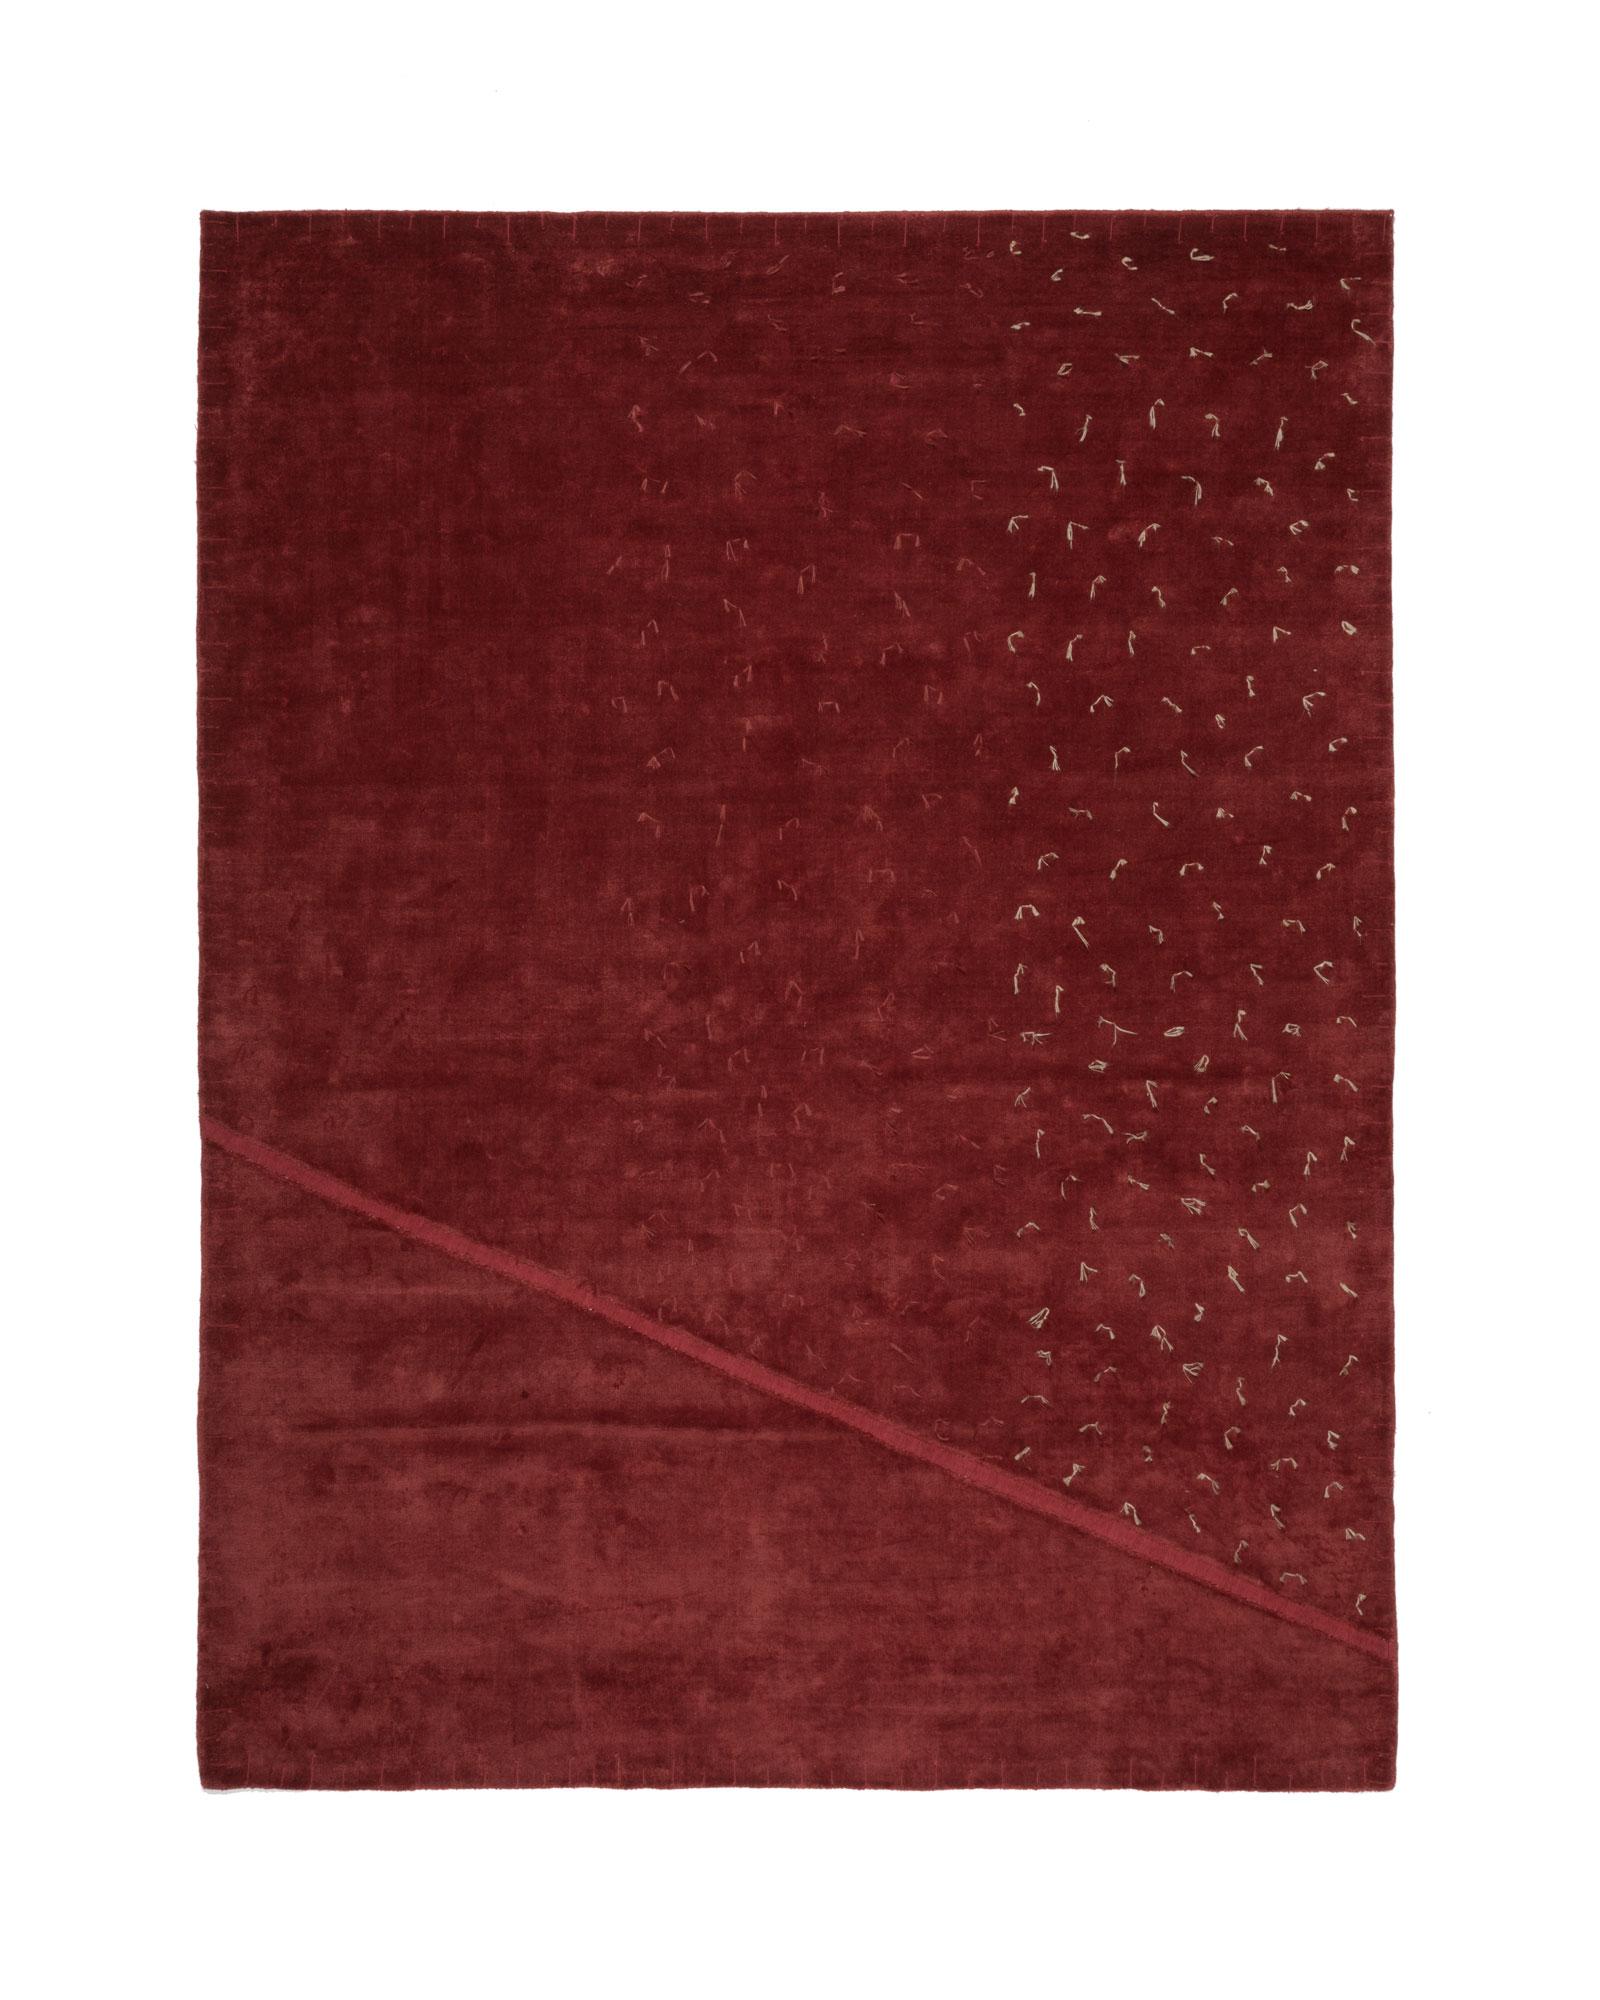 For Sale: Red cc-tapis Inventory Tack Rug by Faye Toogood